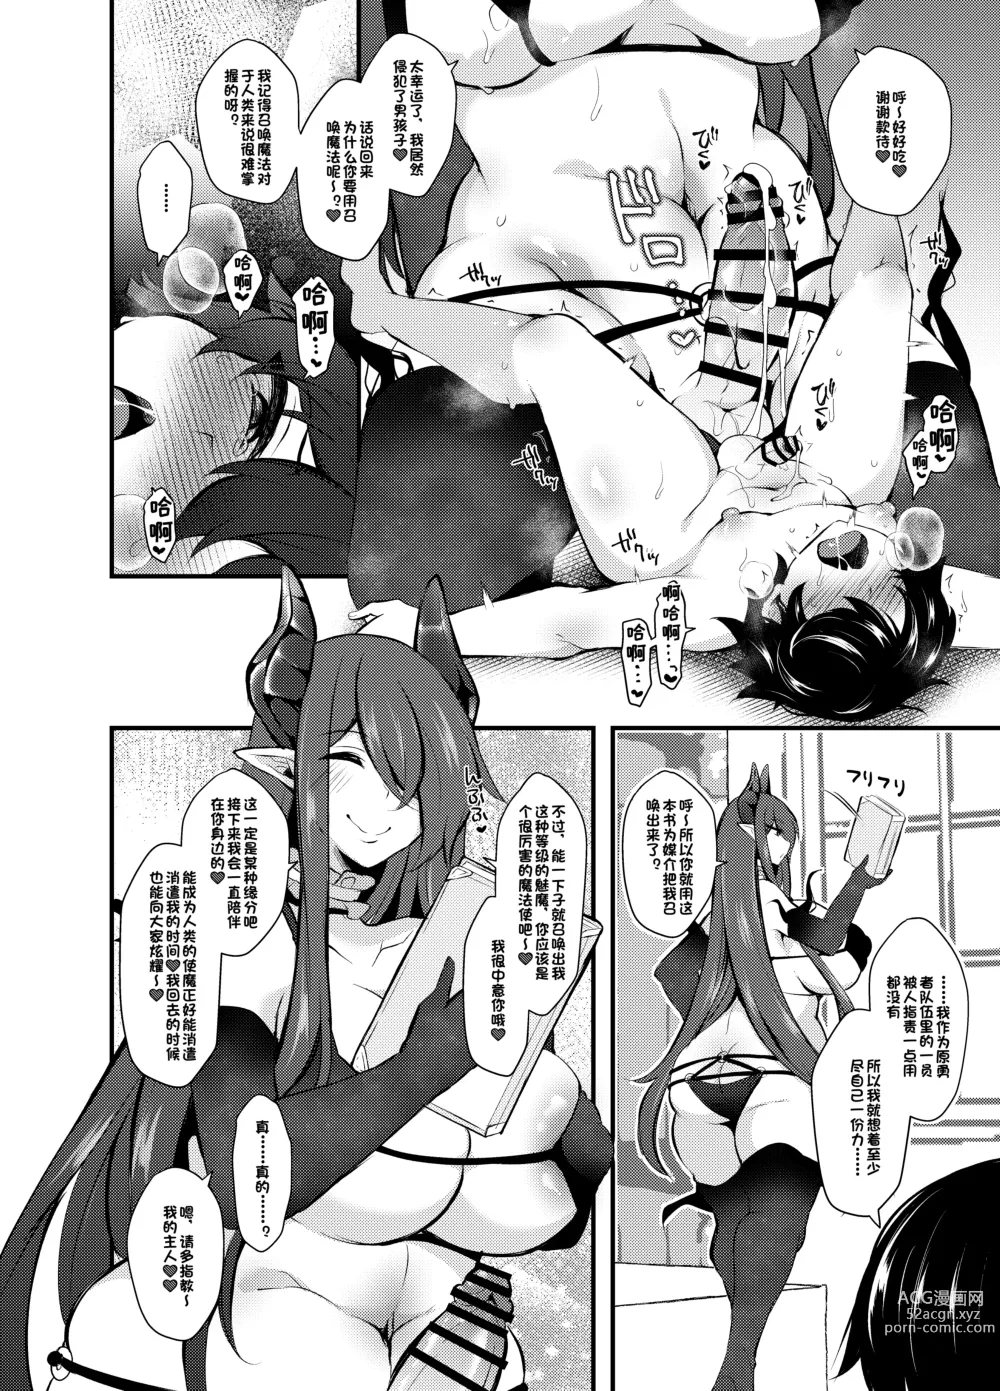 Page 9 of doujinshi I, a witch who got kicked out of the party, learned summoning magic and made a contract with the strongest succubus